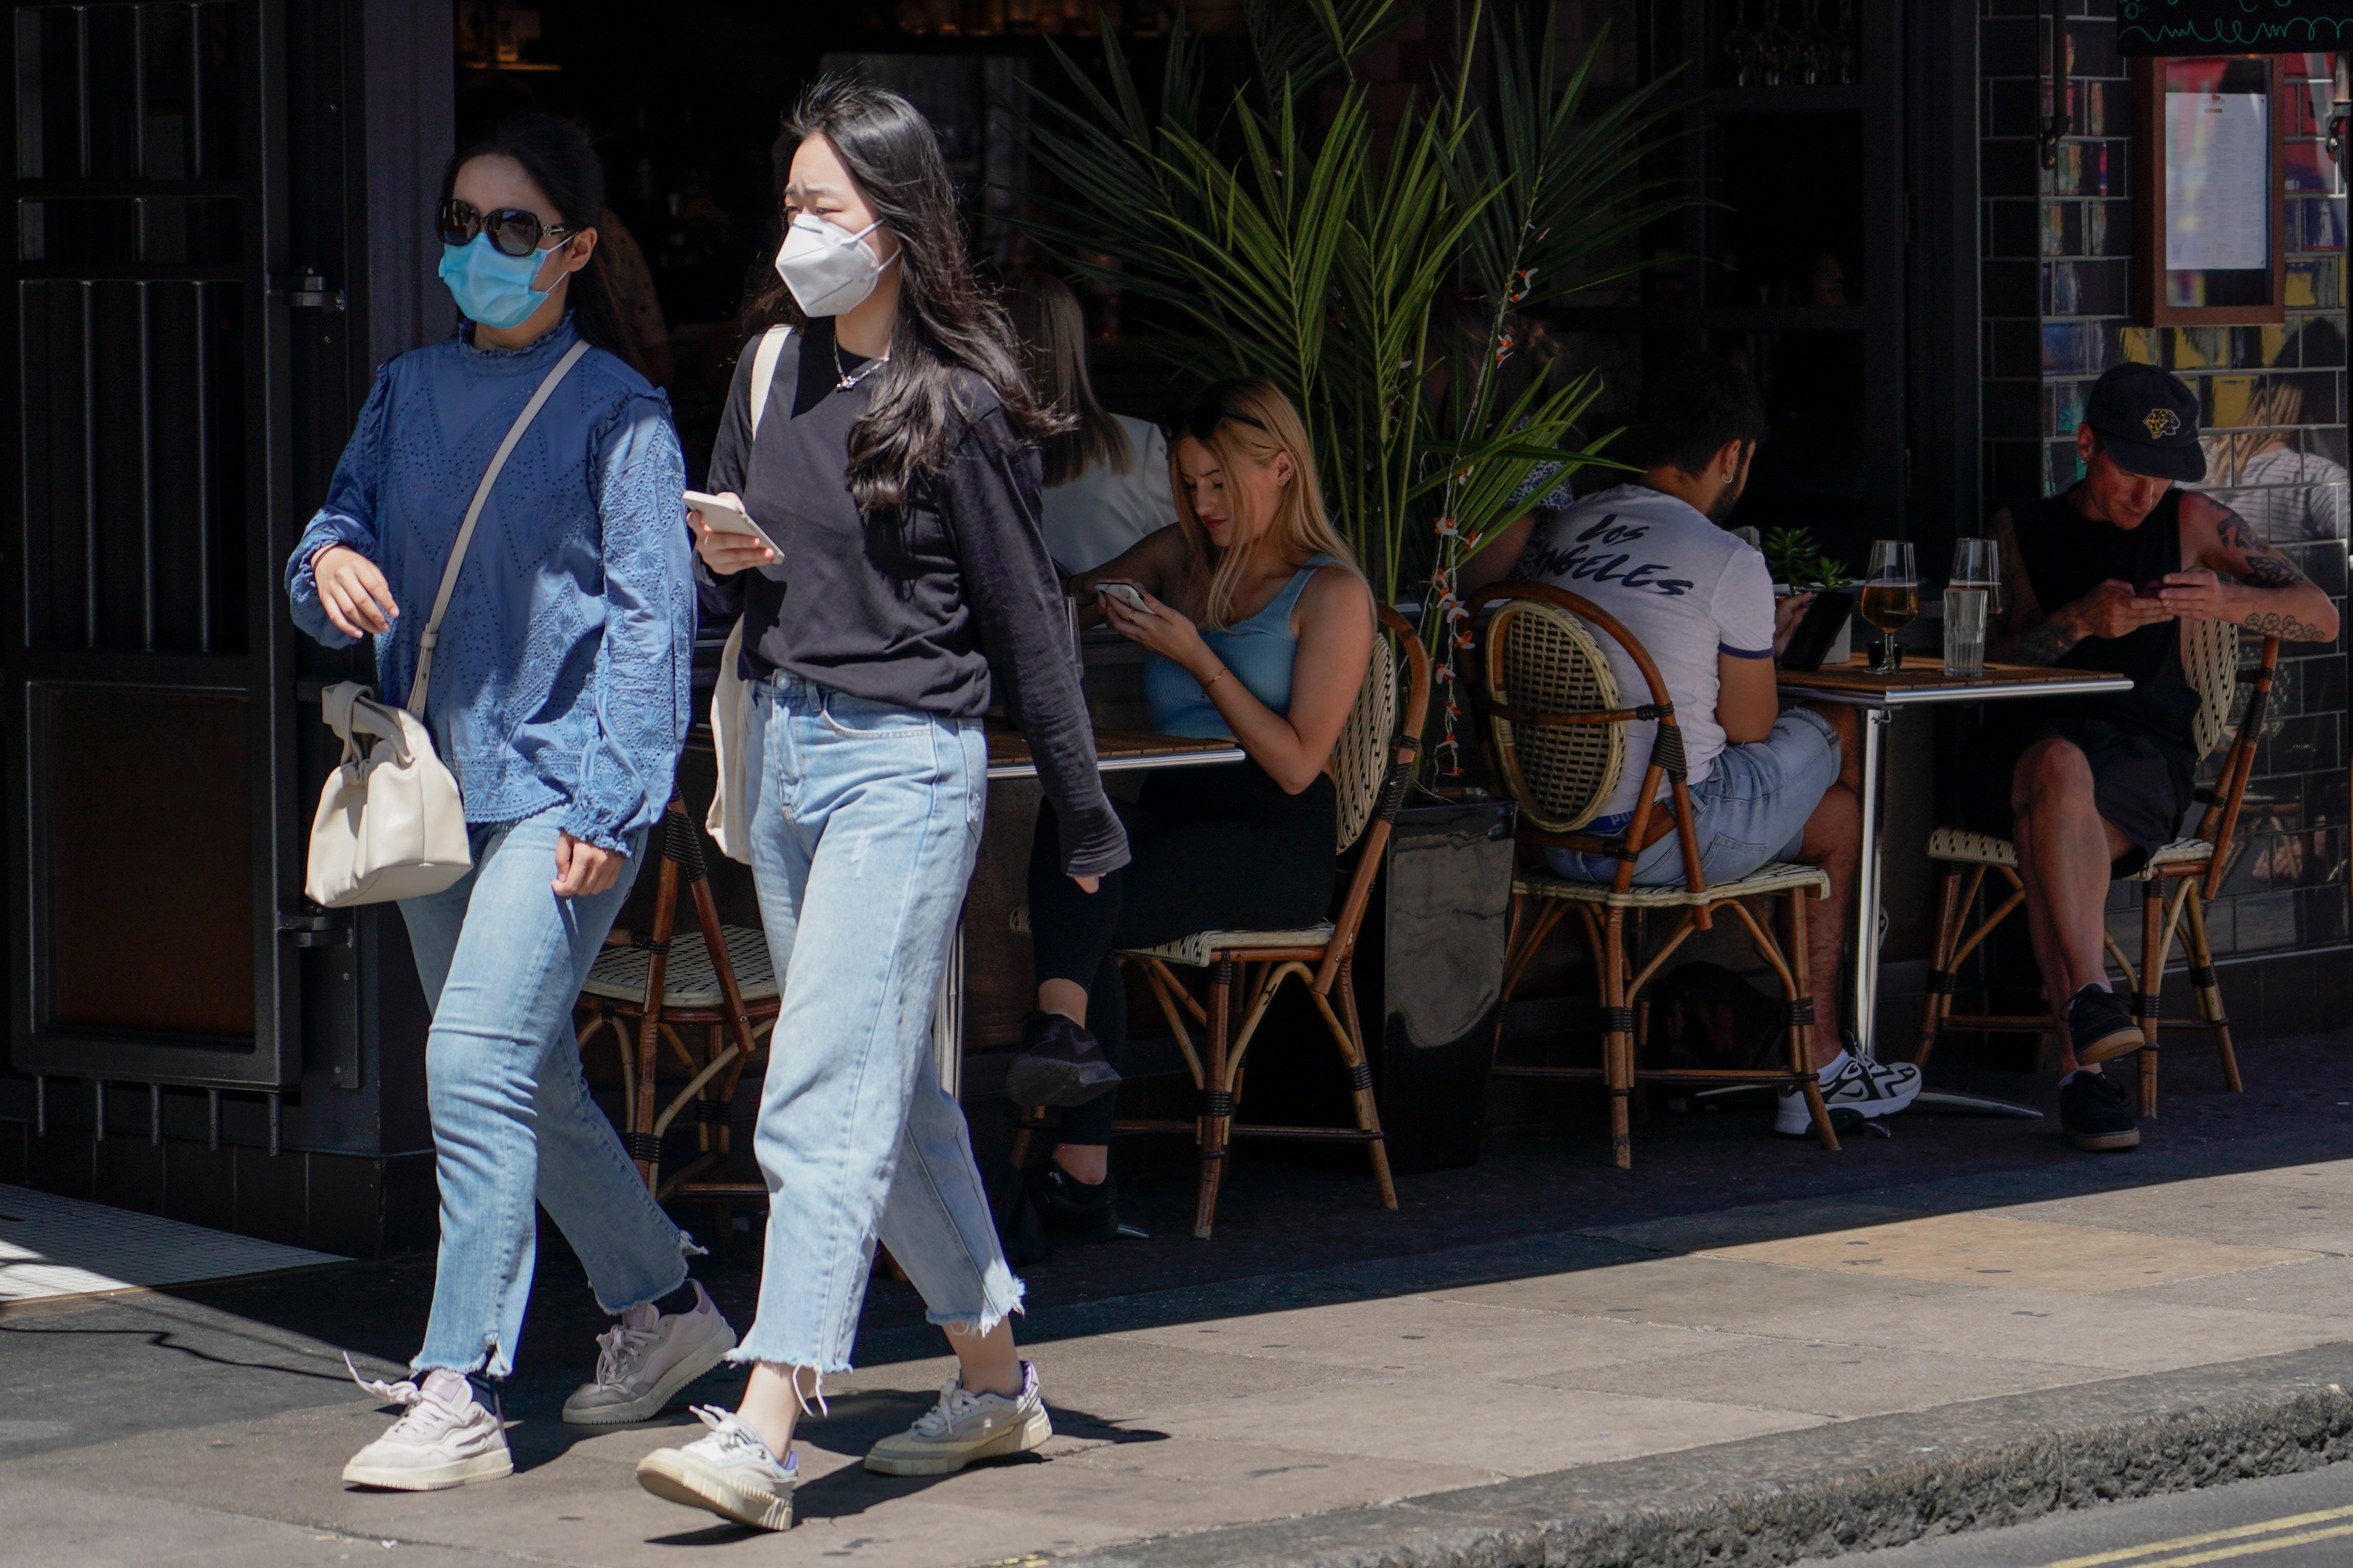 People sit at outdoor tables at a restaurant in Soho, in London, on Monday as coronavirus cases hit the highest daily rate since February.